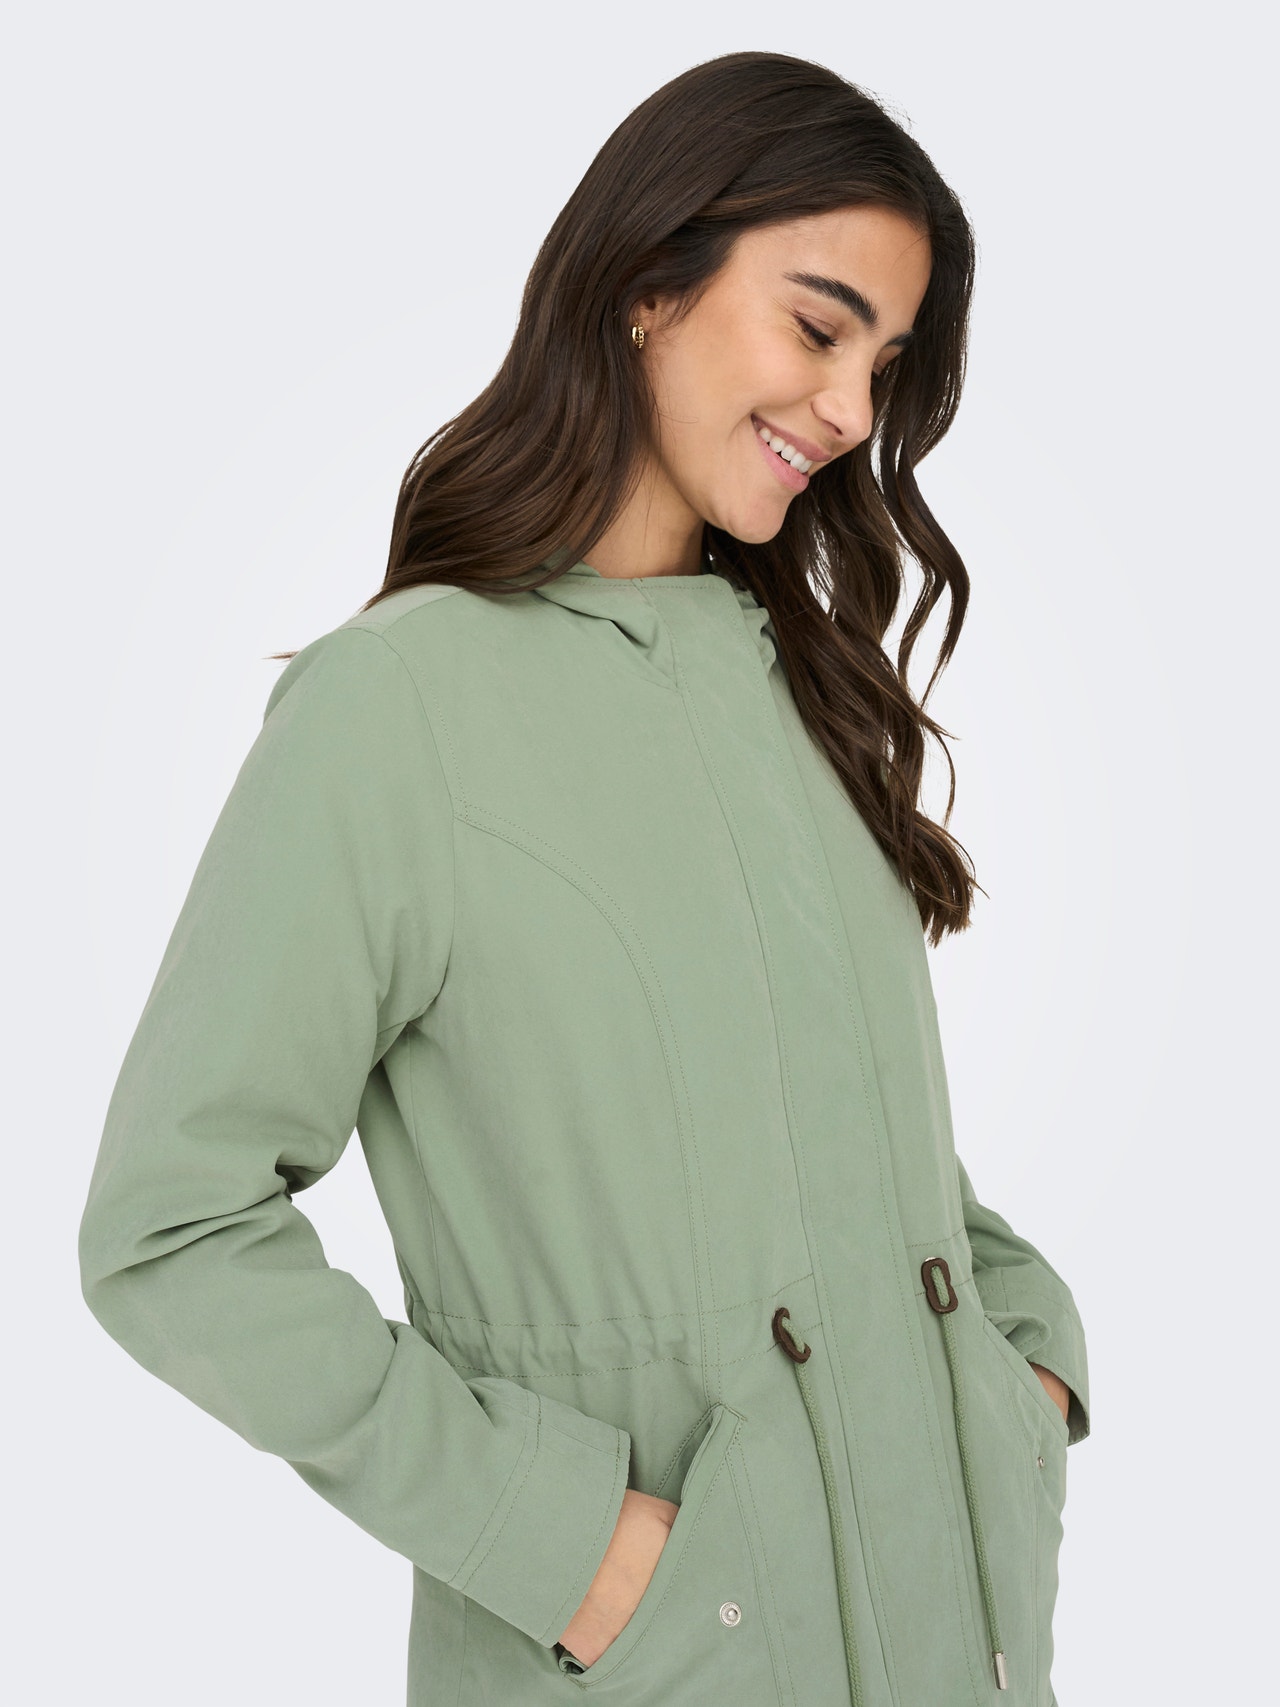 ONLY Hood Jacket -Hedge Green - 15293592